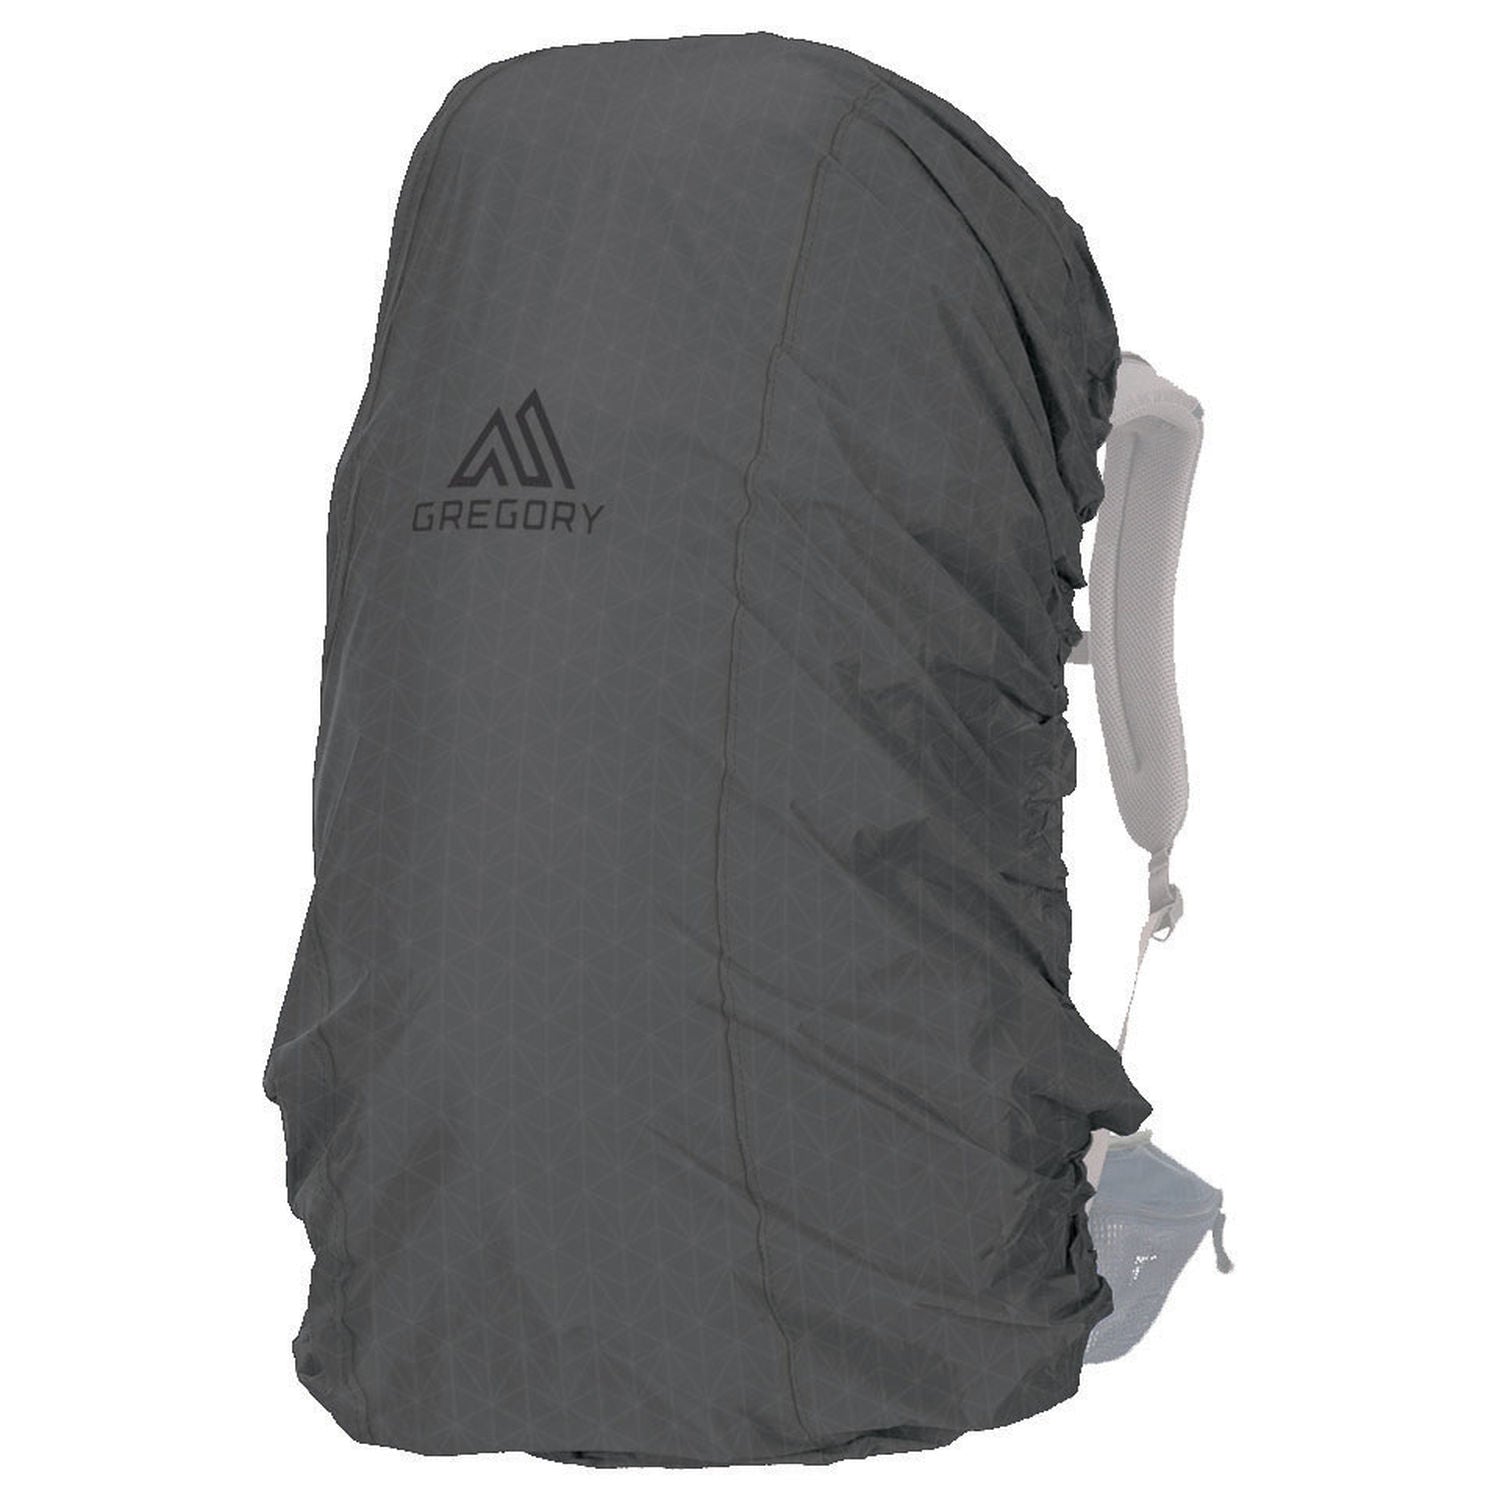 Gregory Pro Raincover 50 - Ascent Outdoors LLC